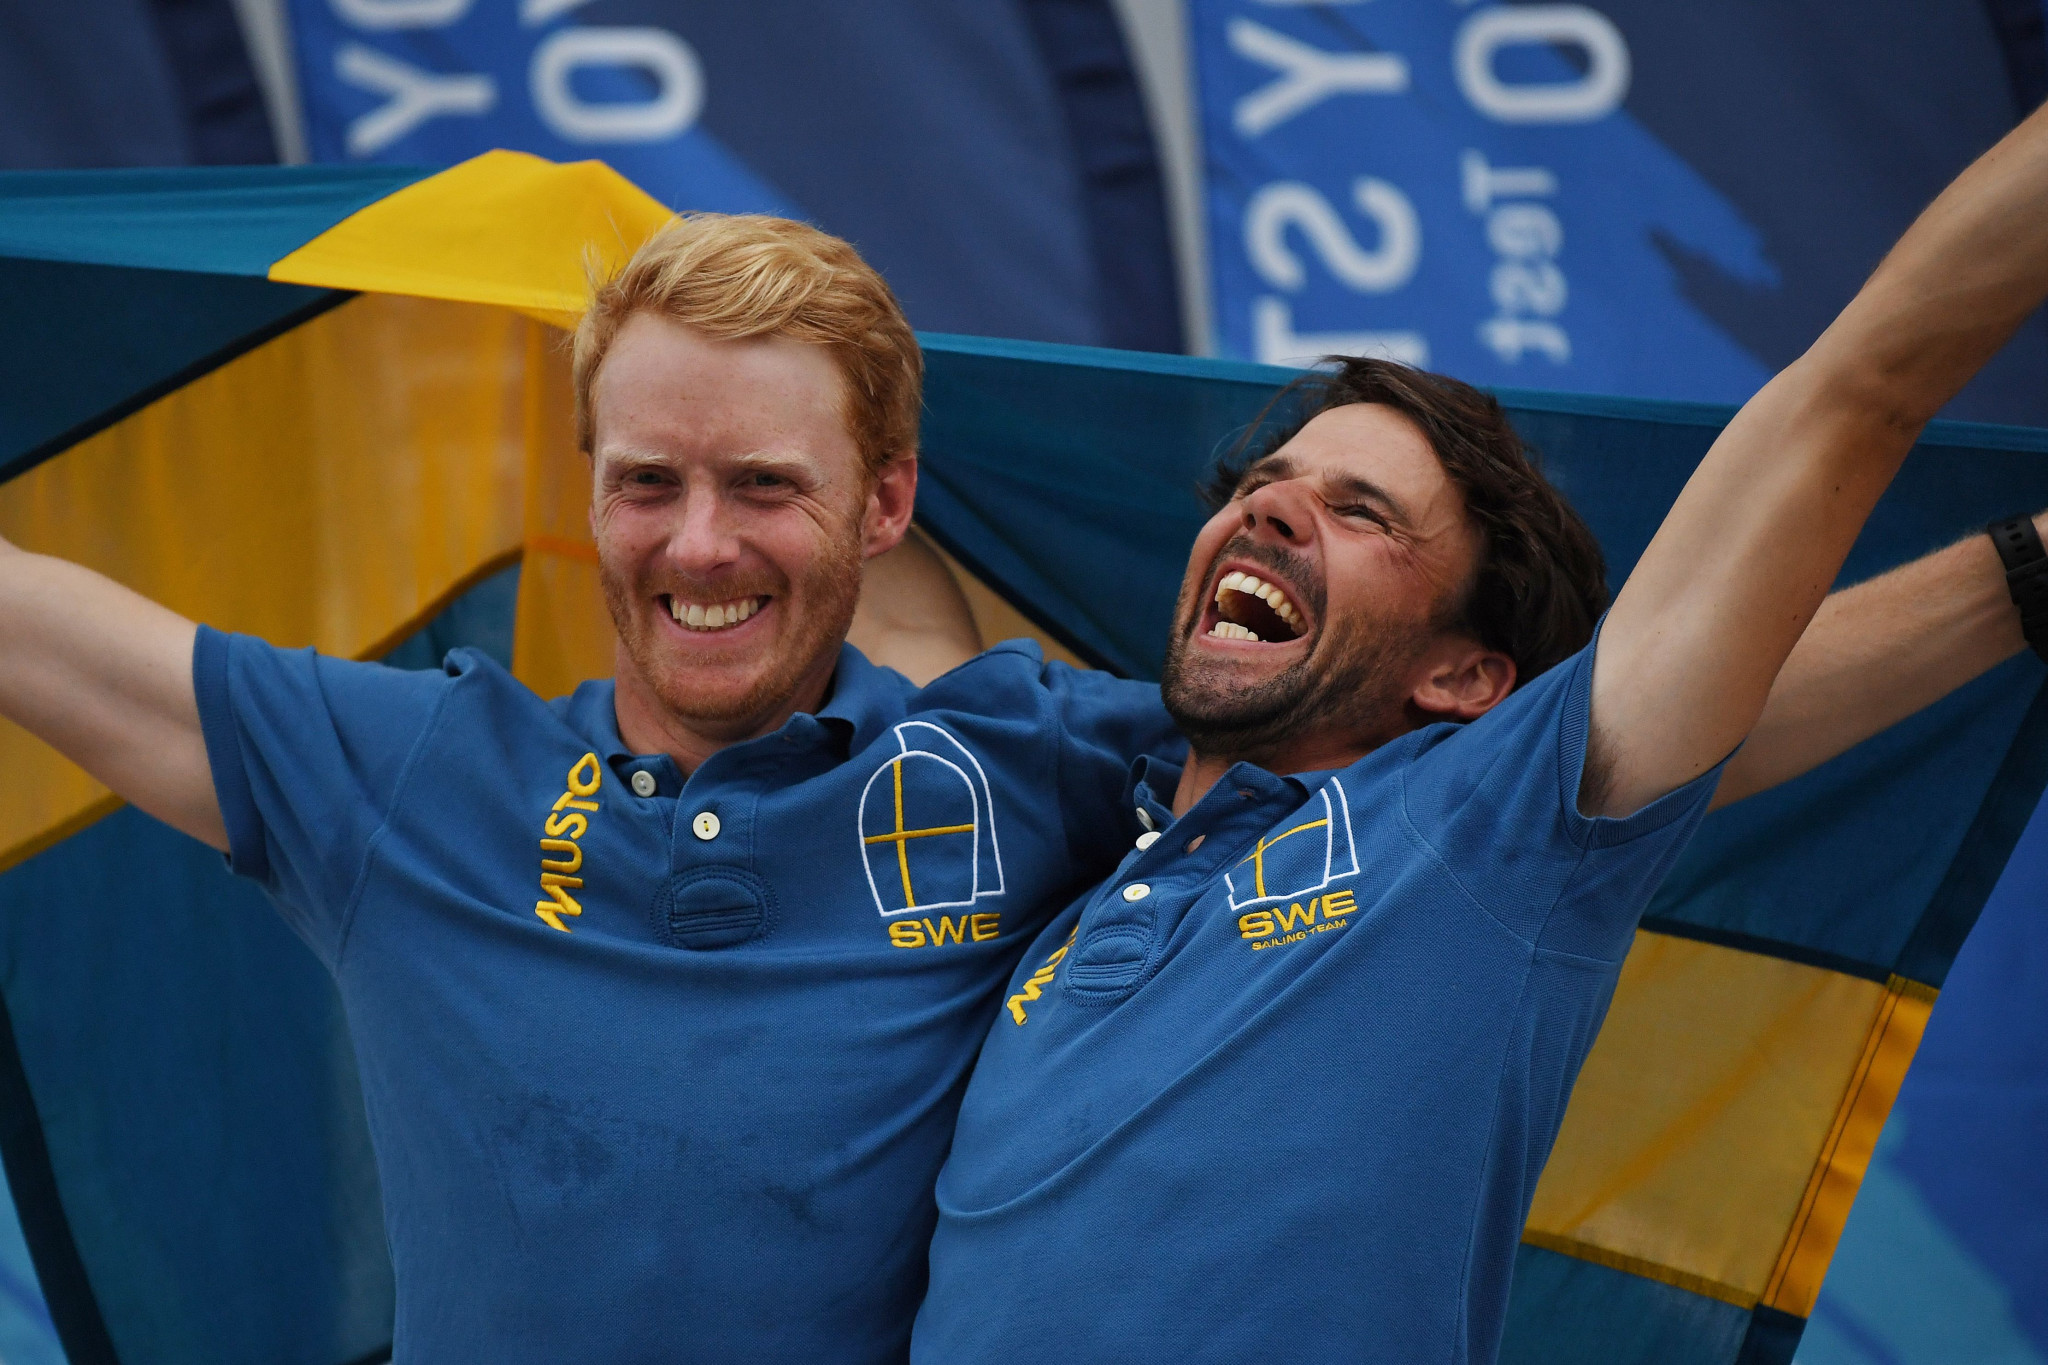 Anton Dahlberg and Fredrik Bergström are top of the men's regatta on day three ©Getty Images